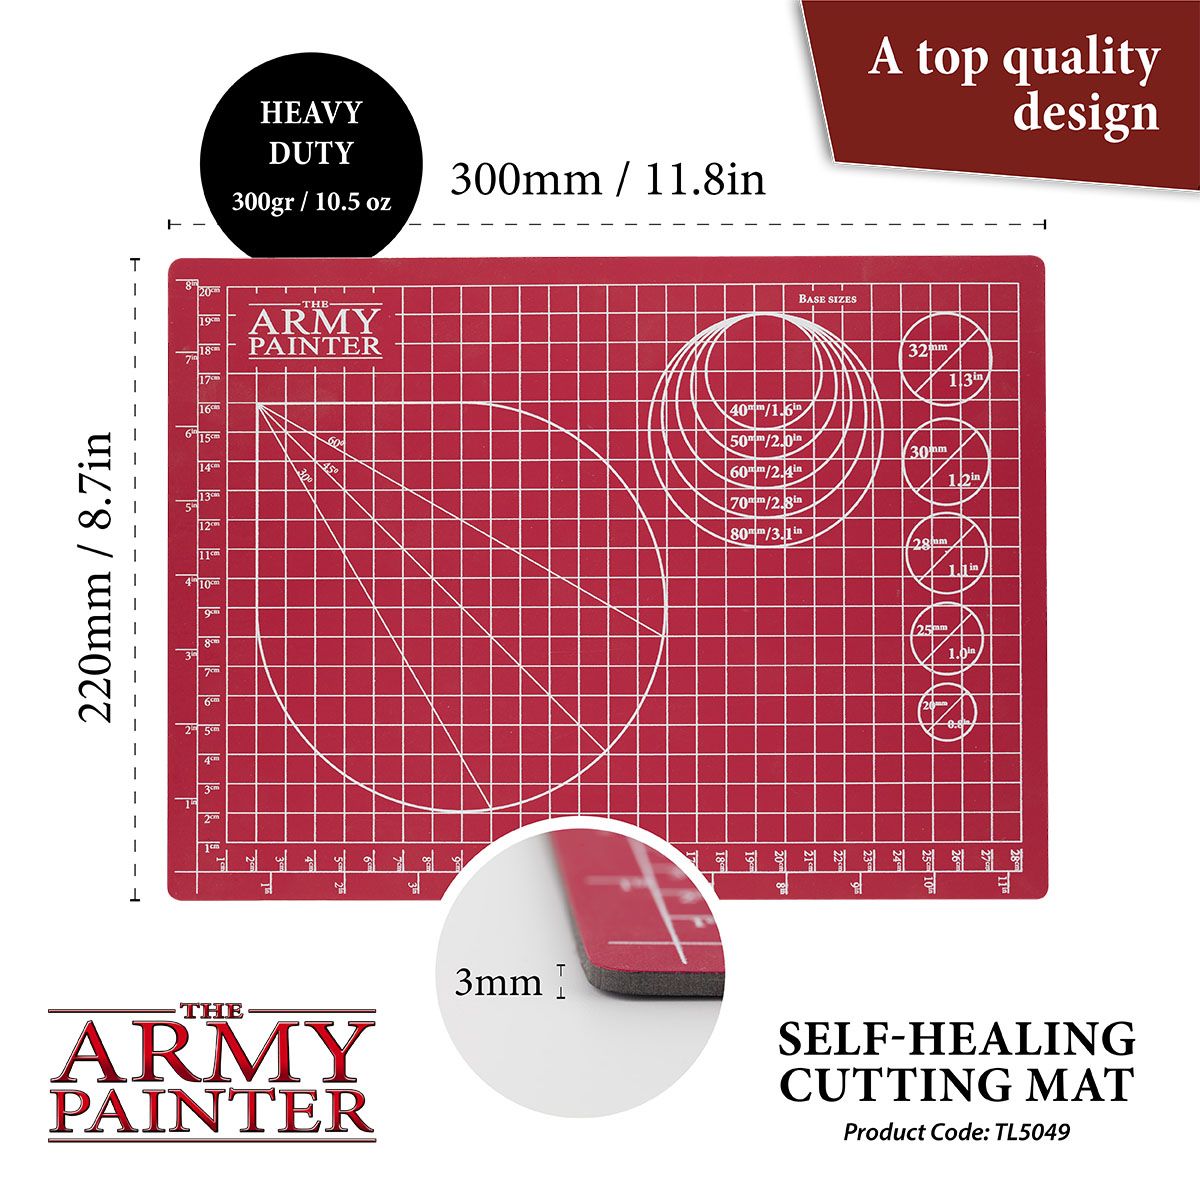 The Army Painter Self-healing Cutting Mat - Bards & Cards